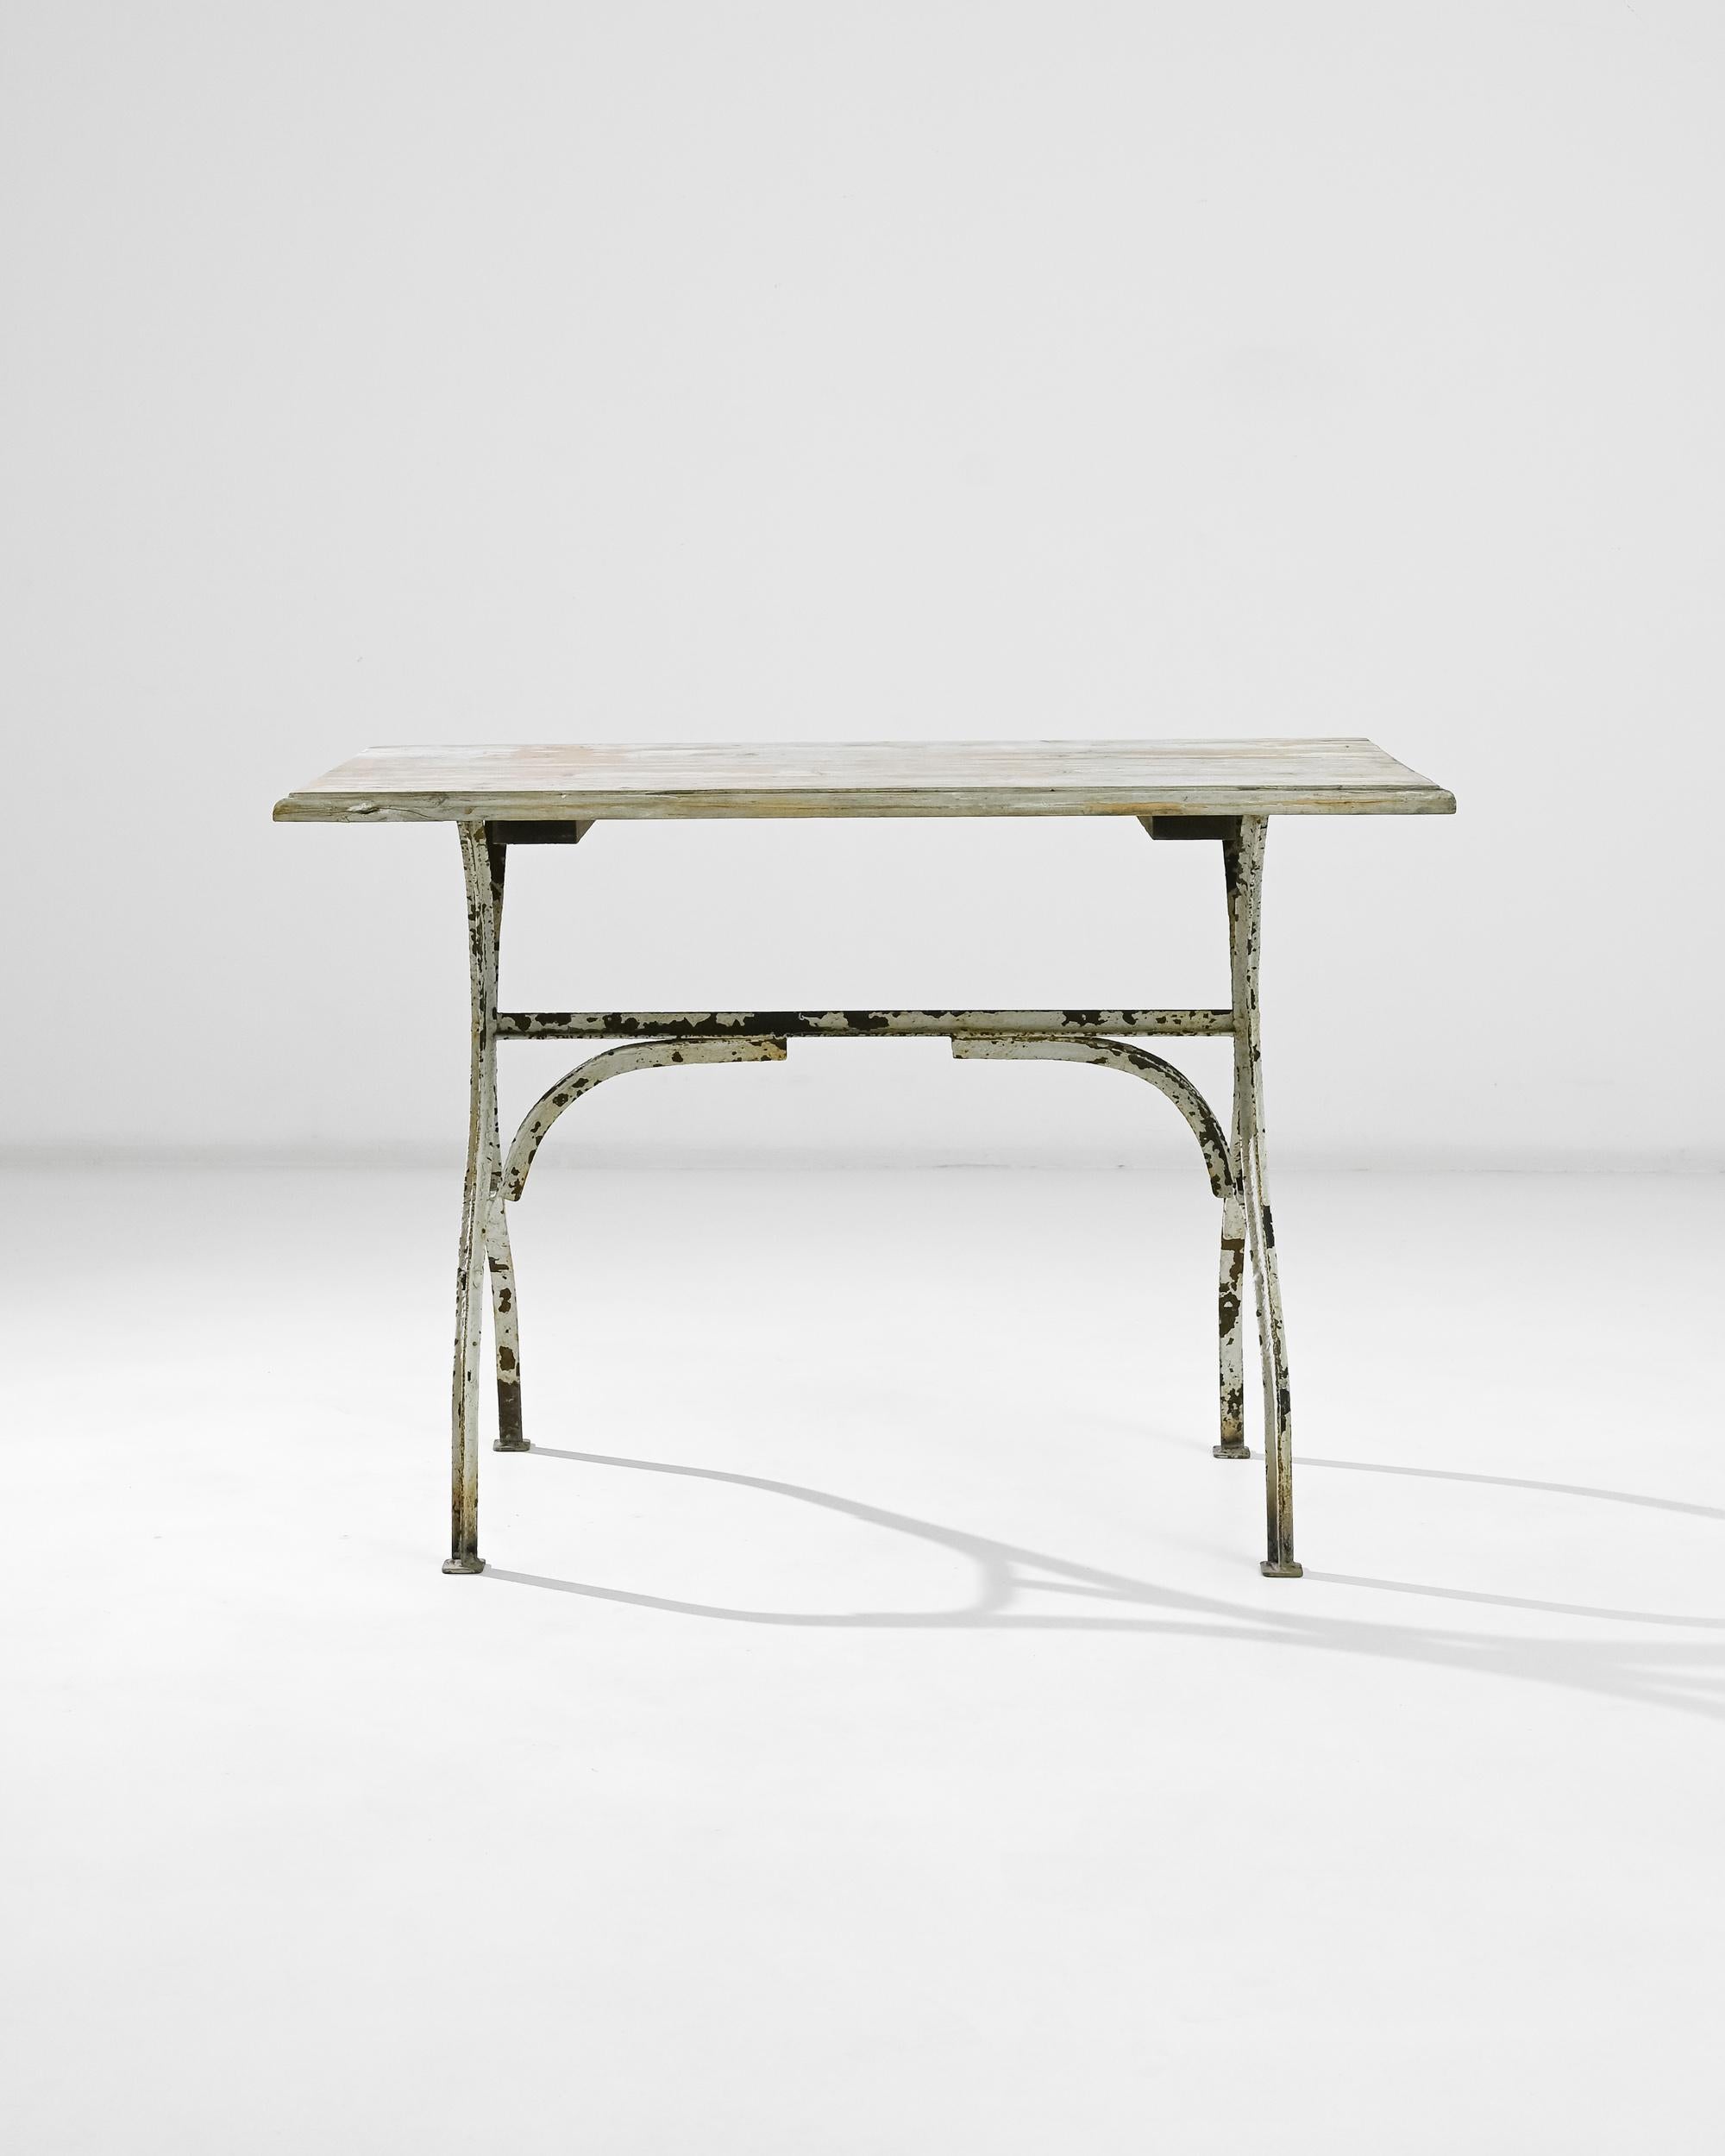 This metal and wooden table was made in France circa 1900. The rectangular tabletop is raised on a riveted metal base, the simple design is held together with a trestle, its supportive armature evoking architectural forms. The characteristic